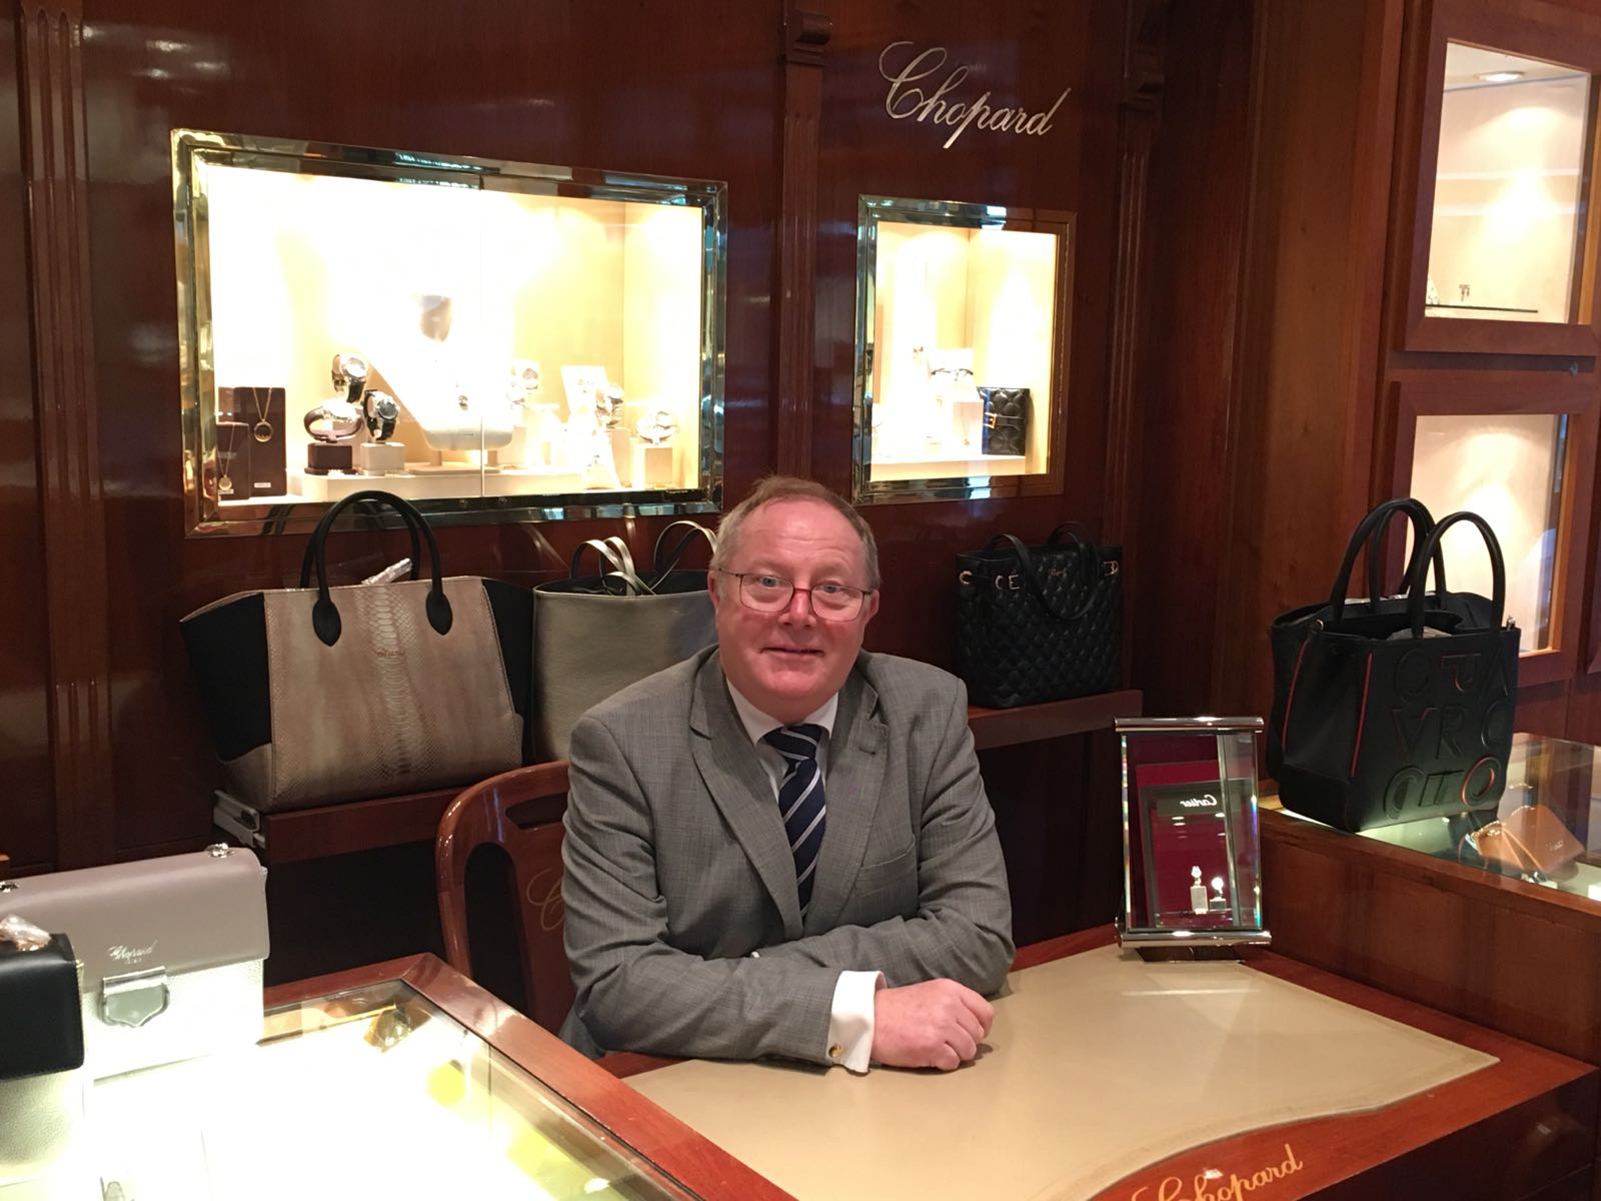 Peter harrington is already familiar face to watch collectors in wilmslow and will take charge of the central manchester store.